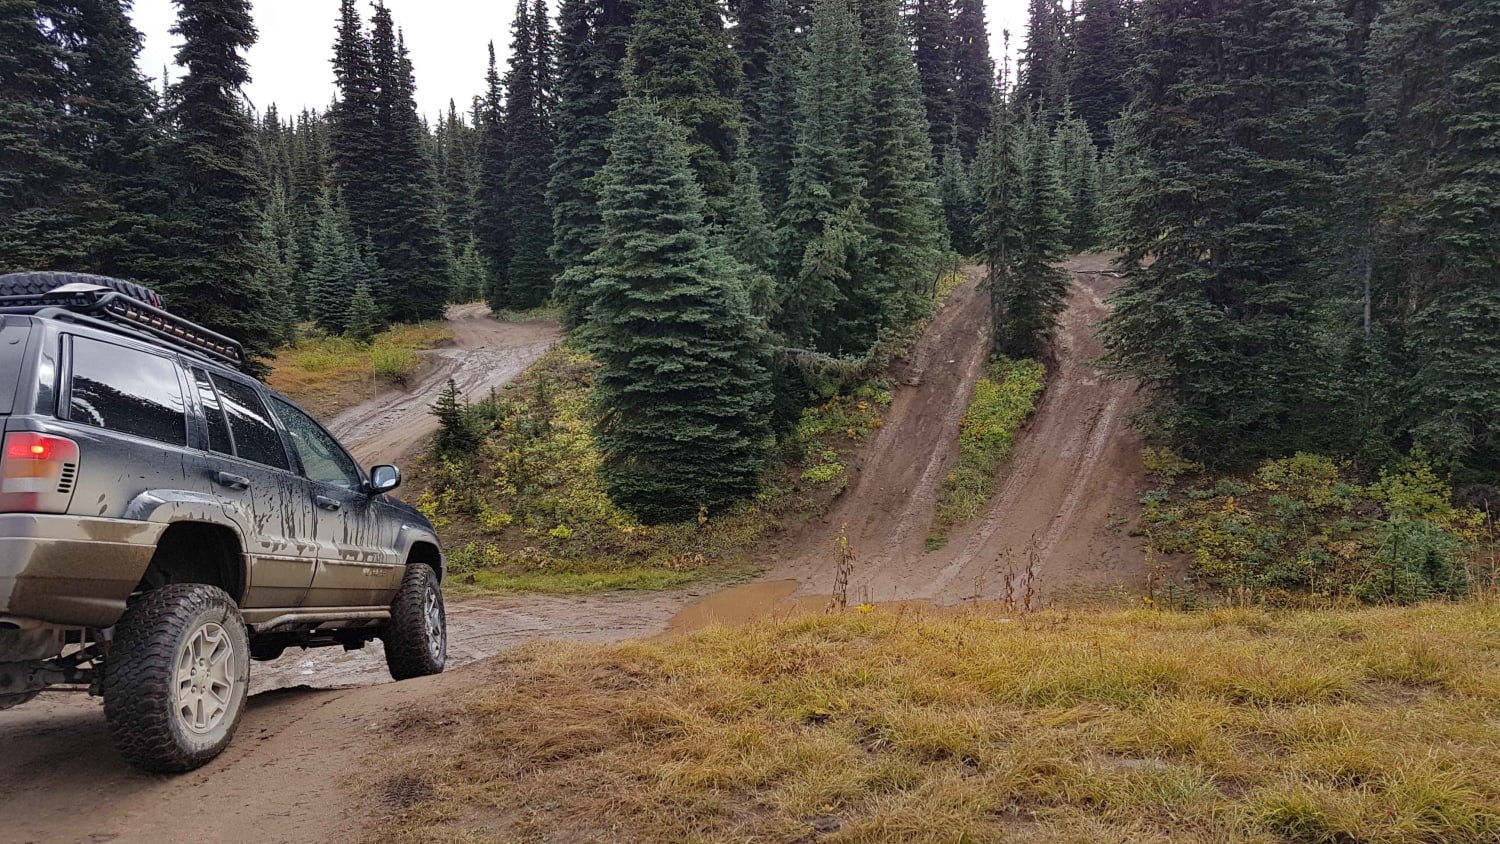 Whipsaw Trail